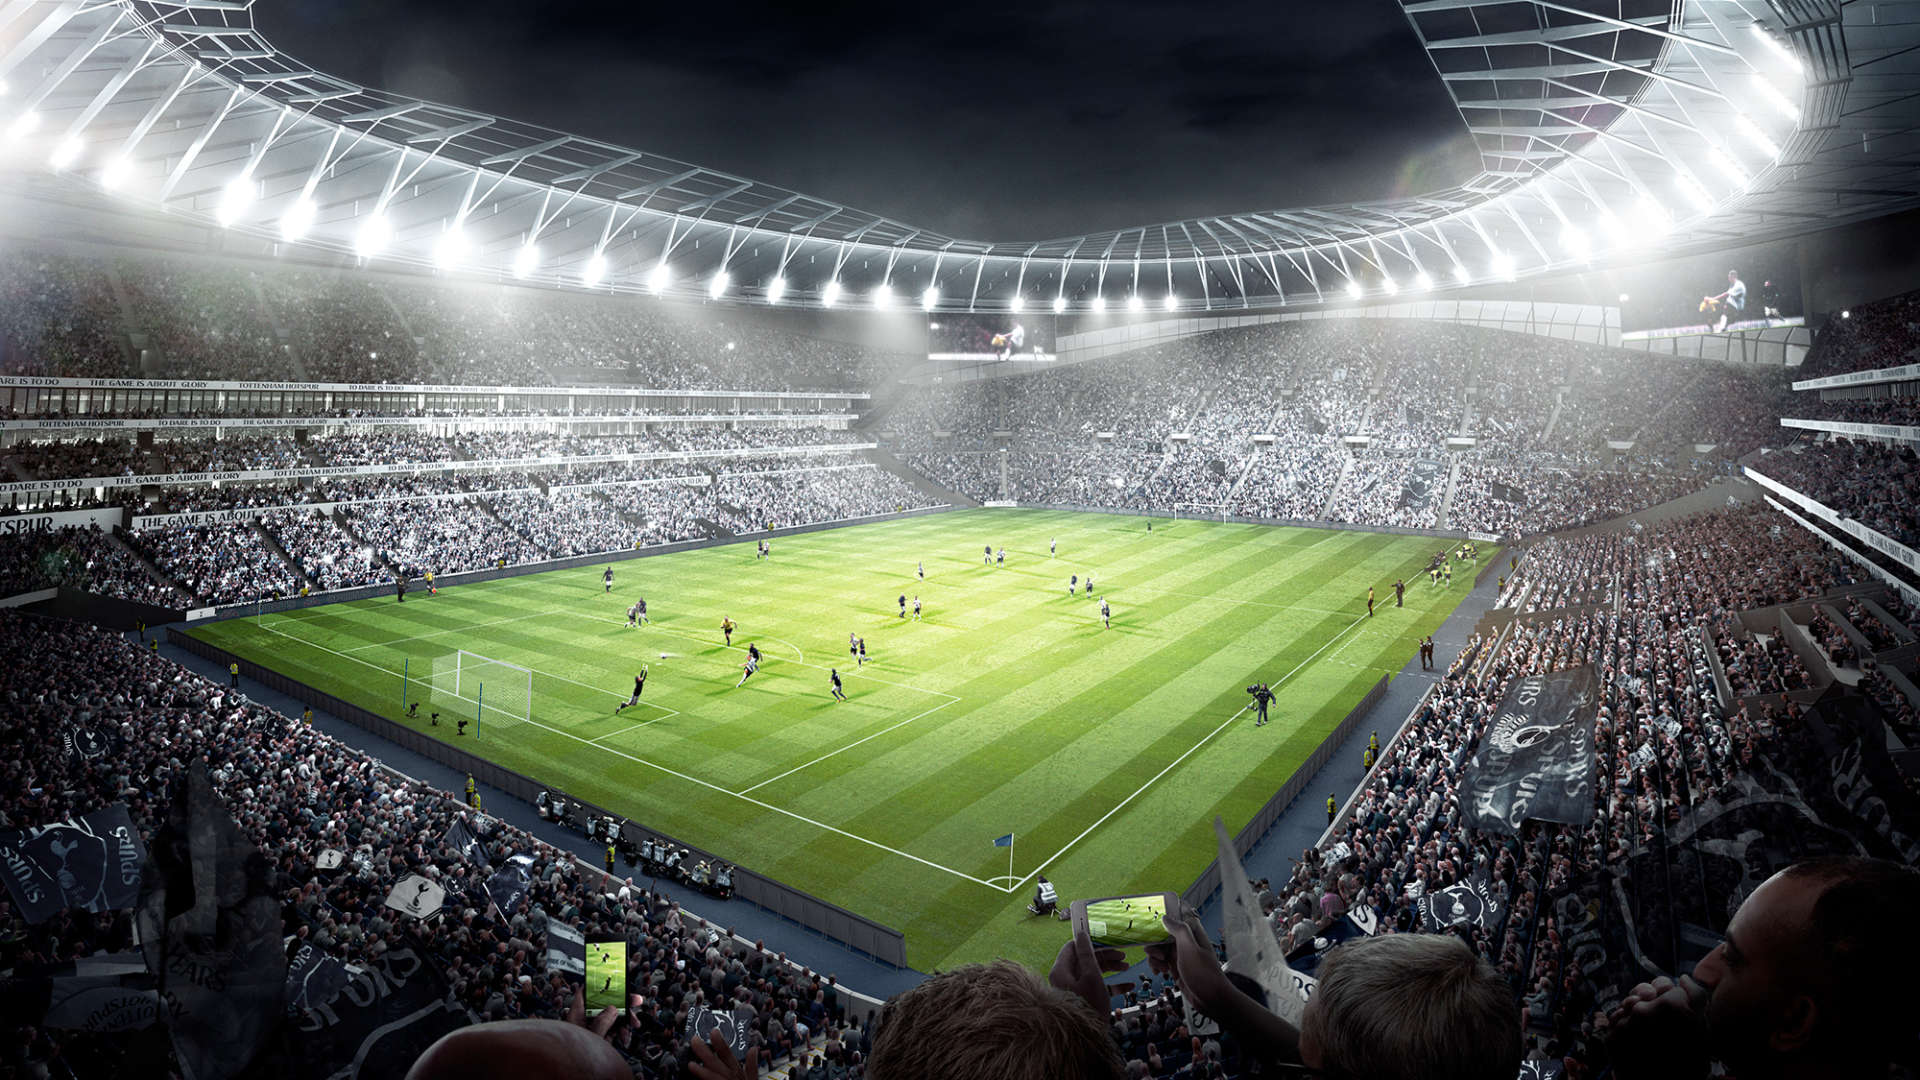 A New Home for Spurs